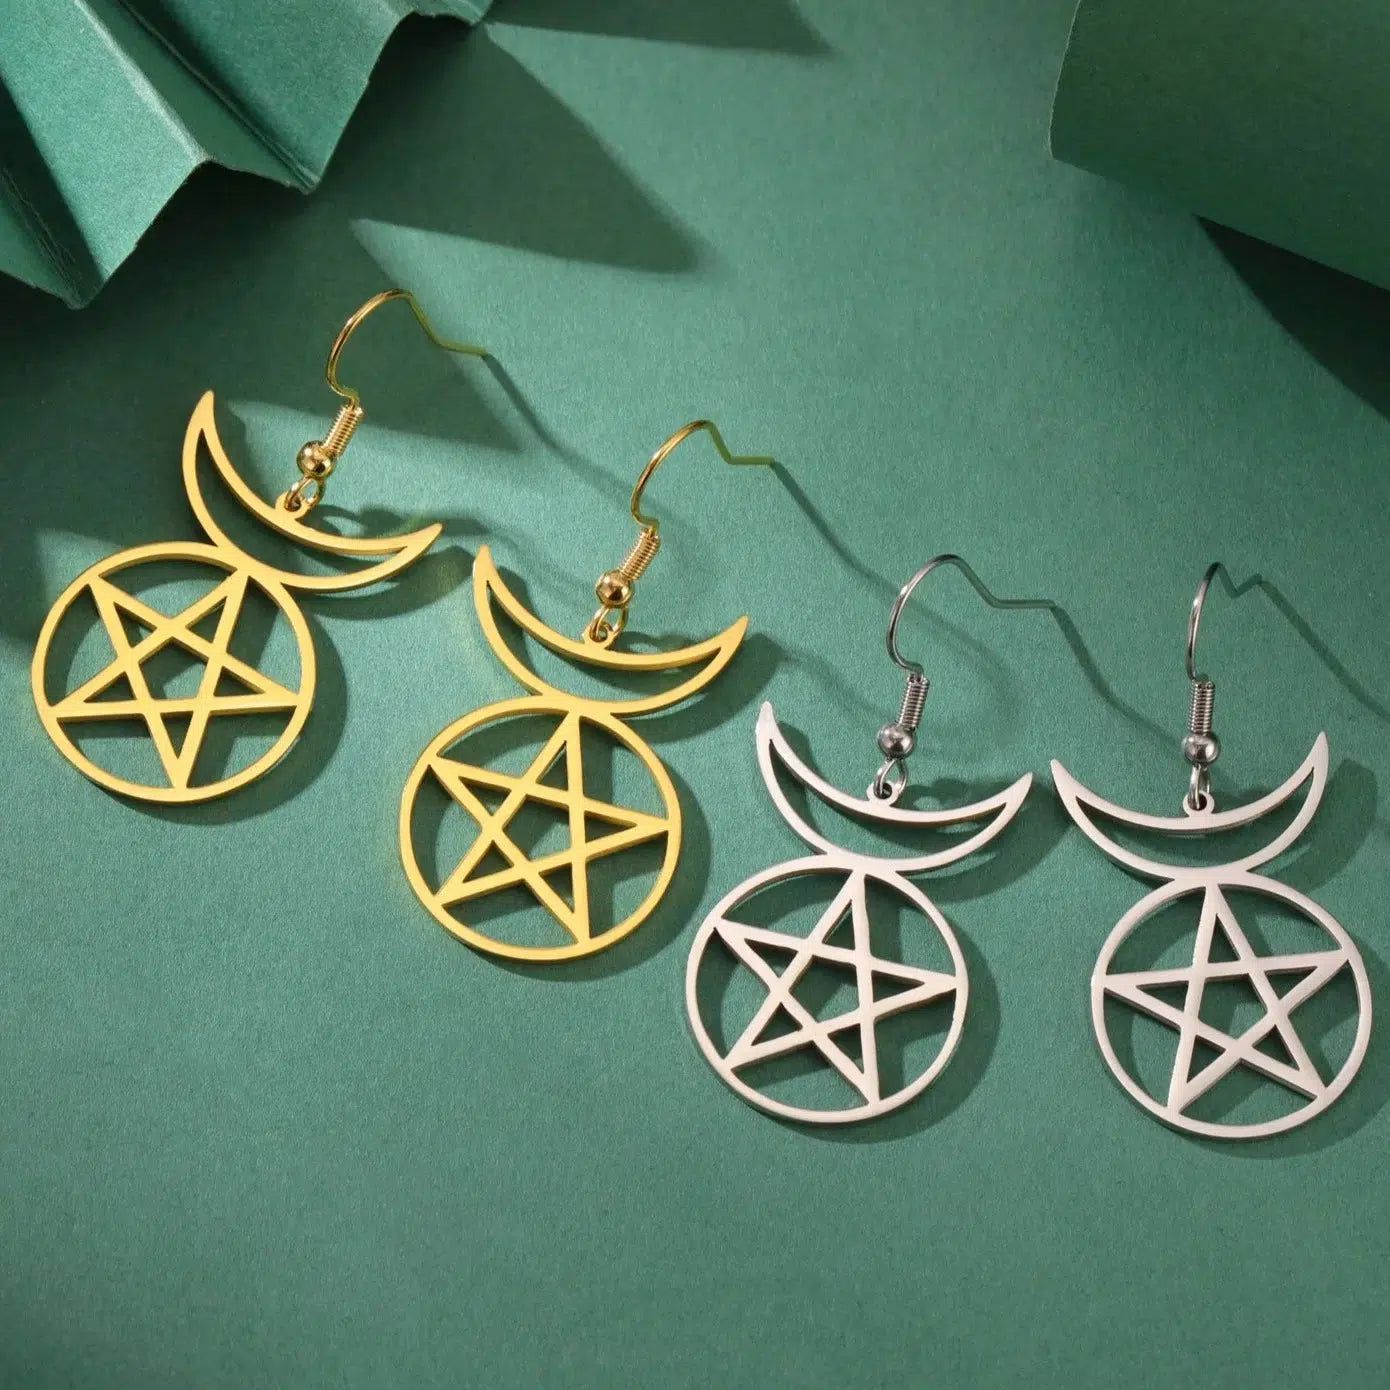 Pentacle Moon Witchcraft Earrings Wicca Amulet Jewelry-MoonChildWorld